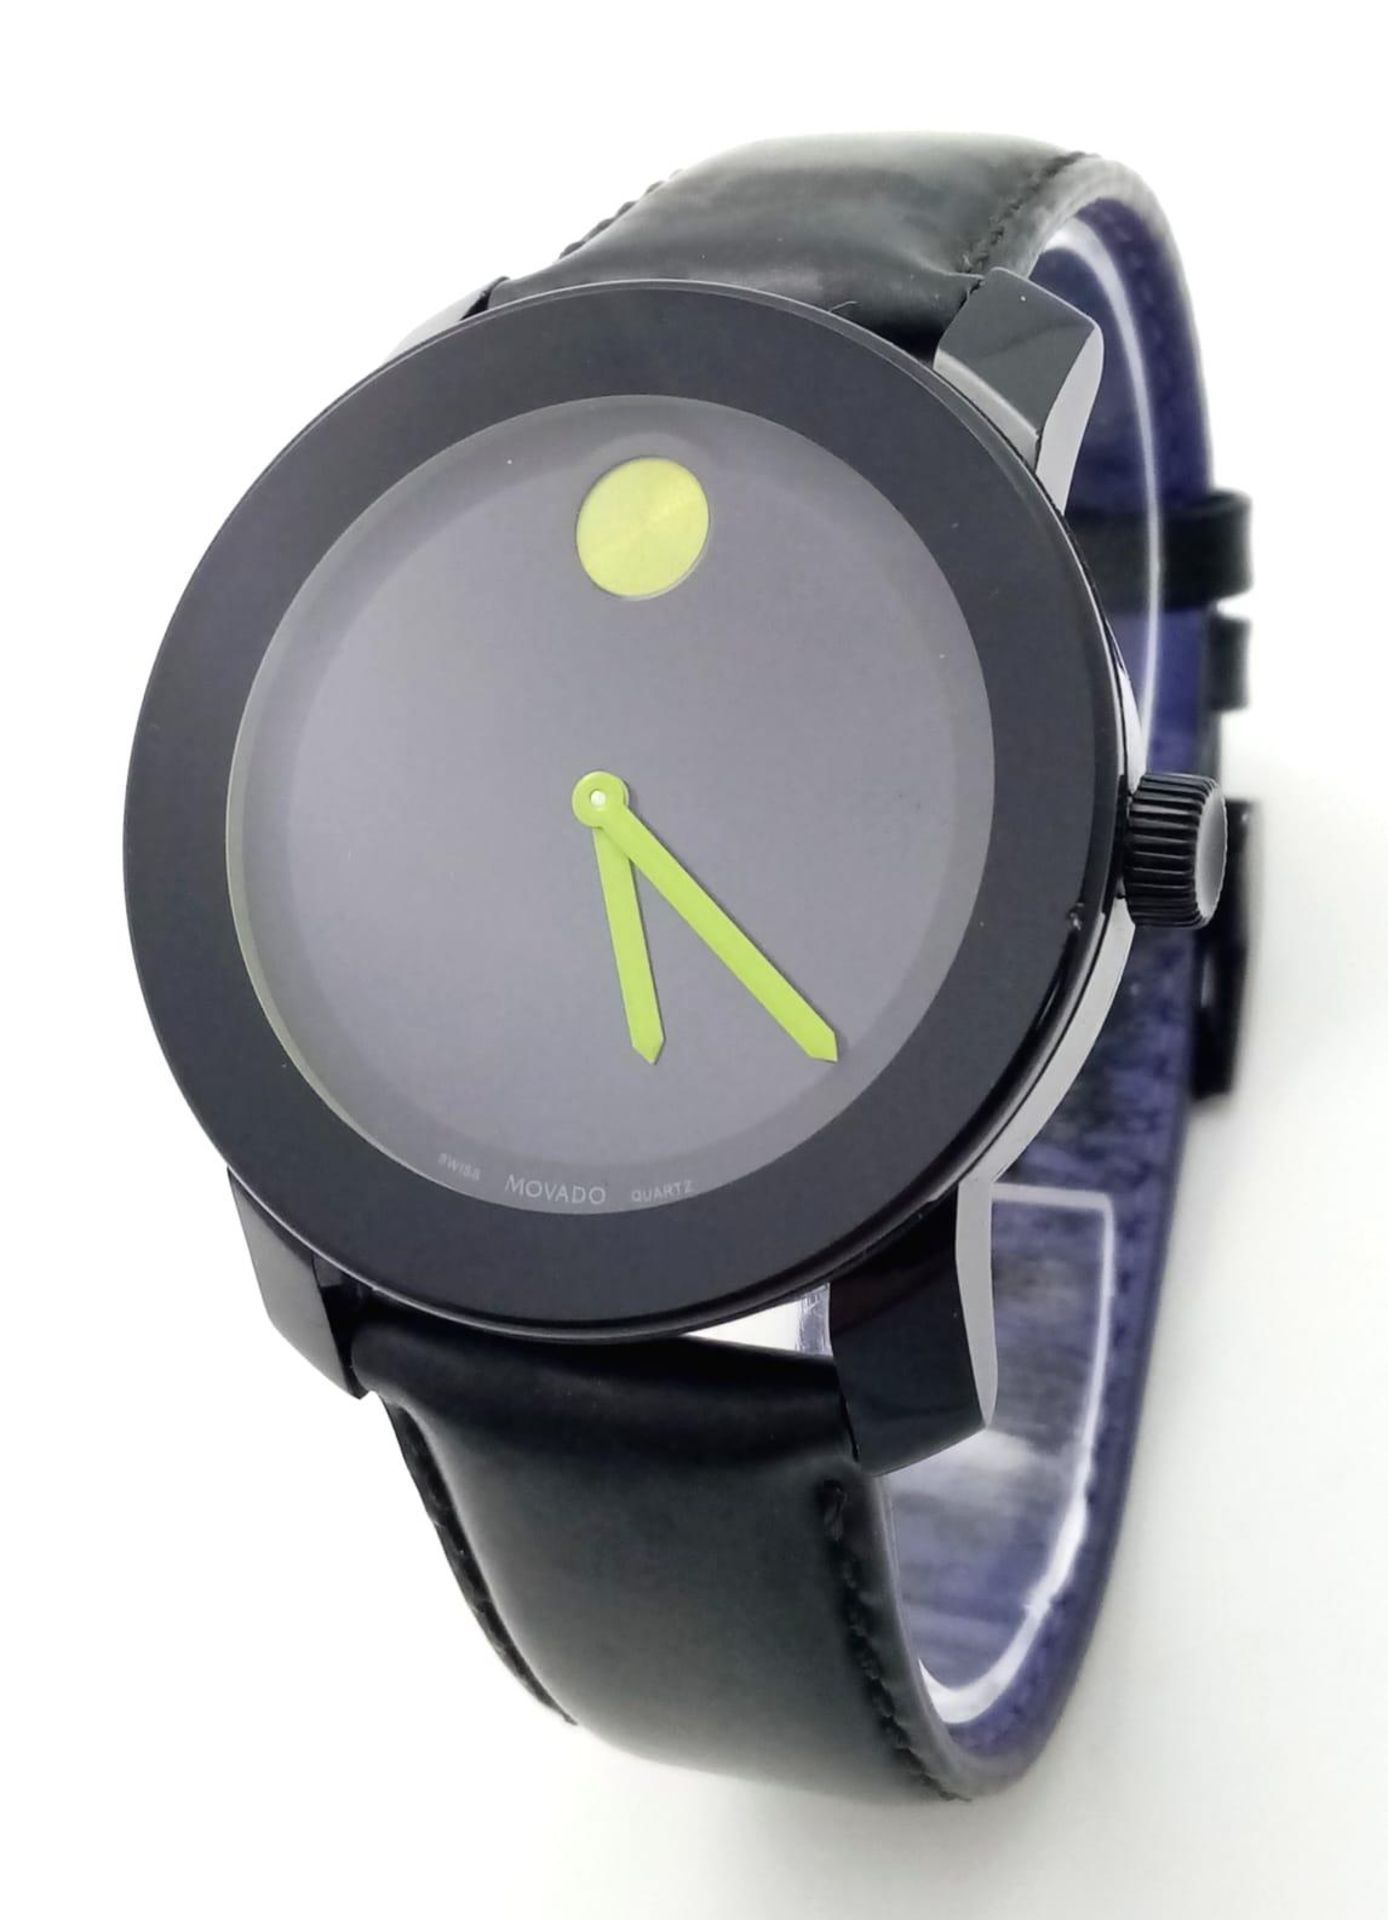 A Movado Bold Quartz Gents Watch. Black leather strap. Stainless steel and ceramic case - 43mm.